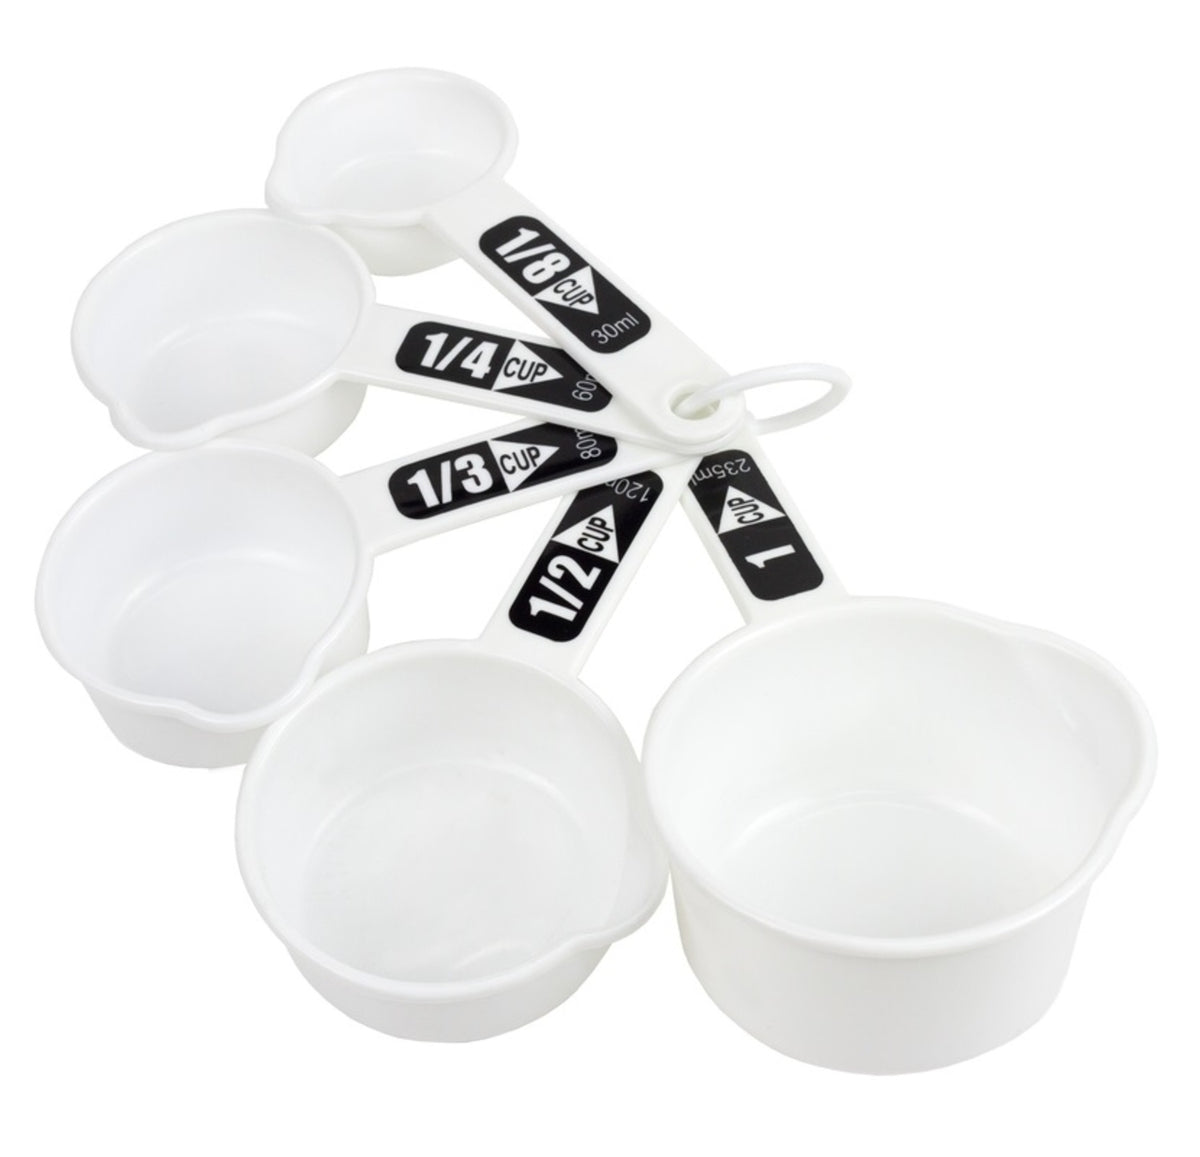 Chef Craft 21392 Measuring Cups, Plastic, White Color